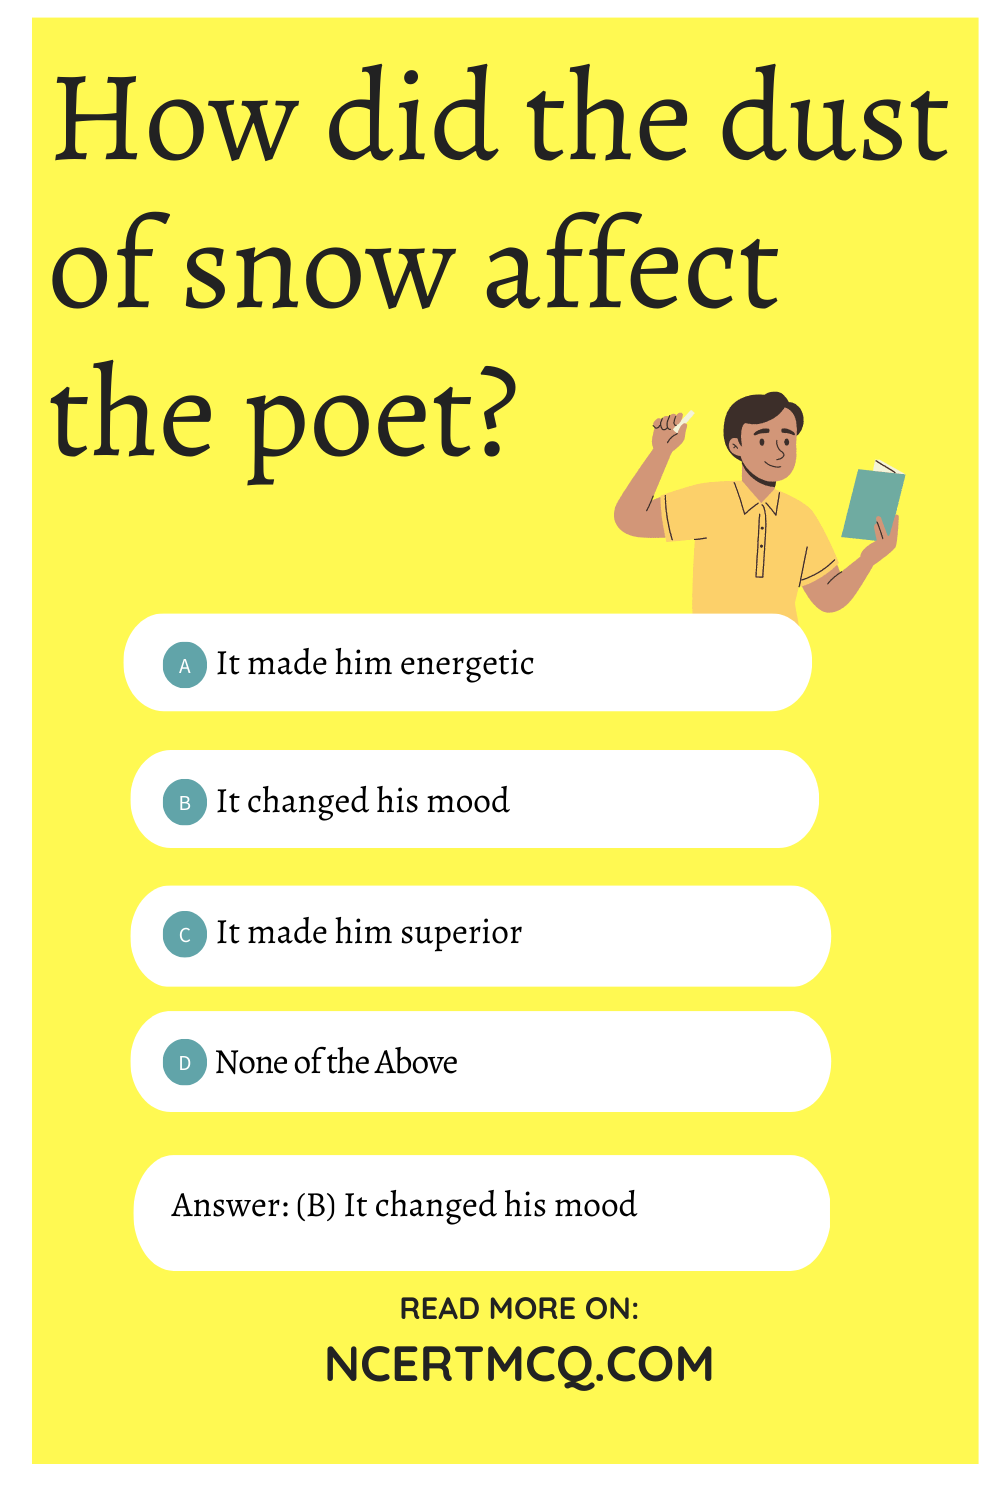 How did the dust of snow affect the poet?